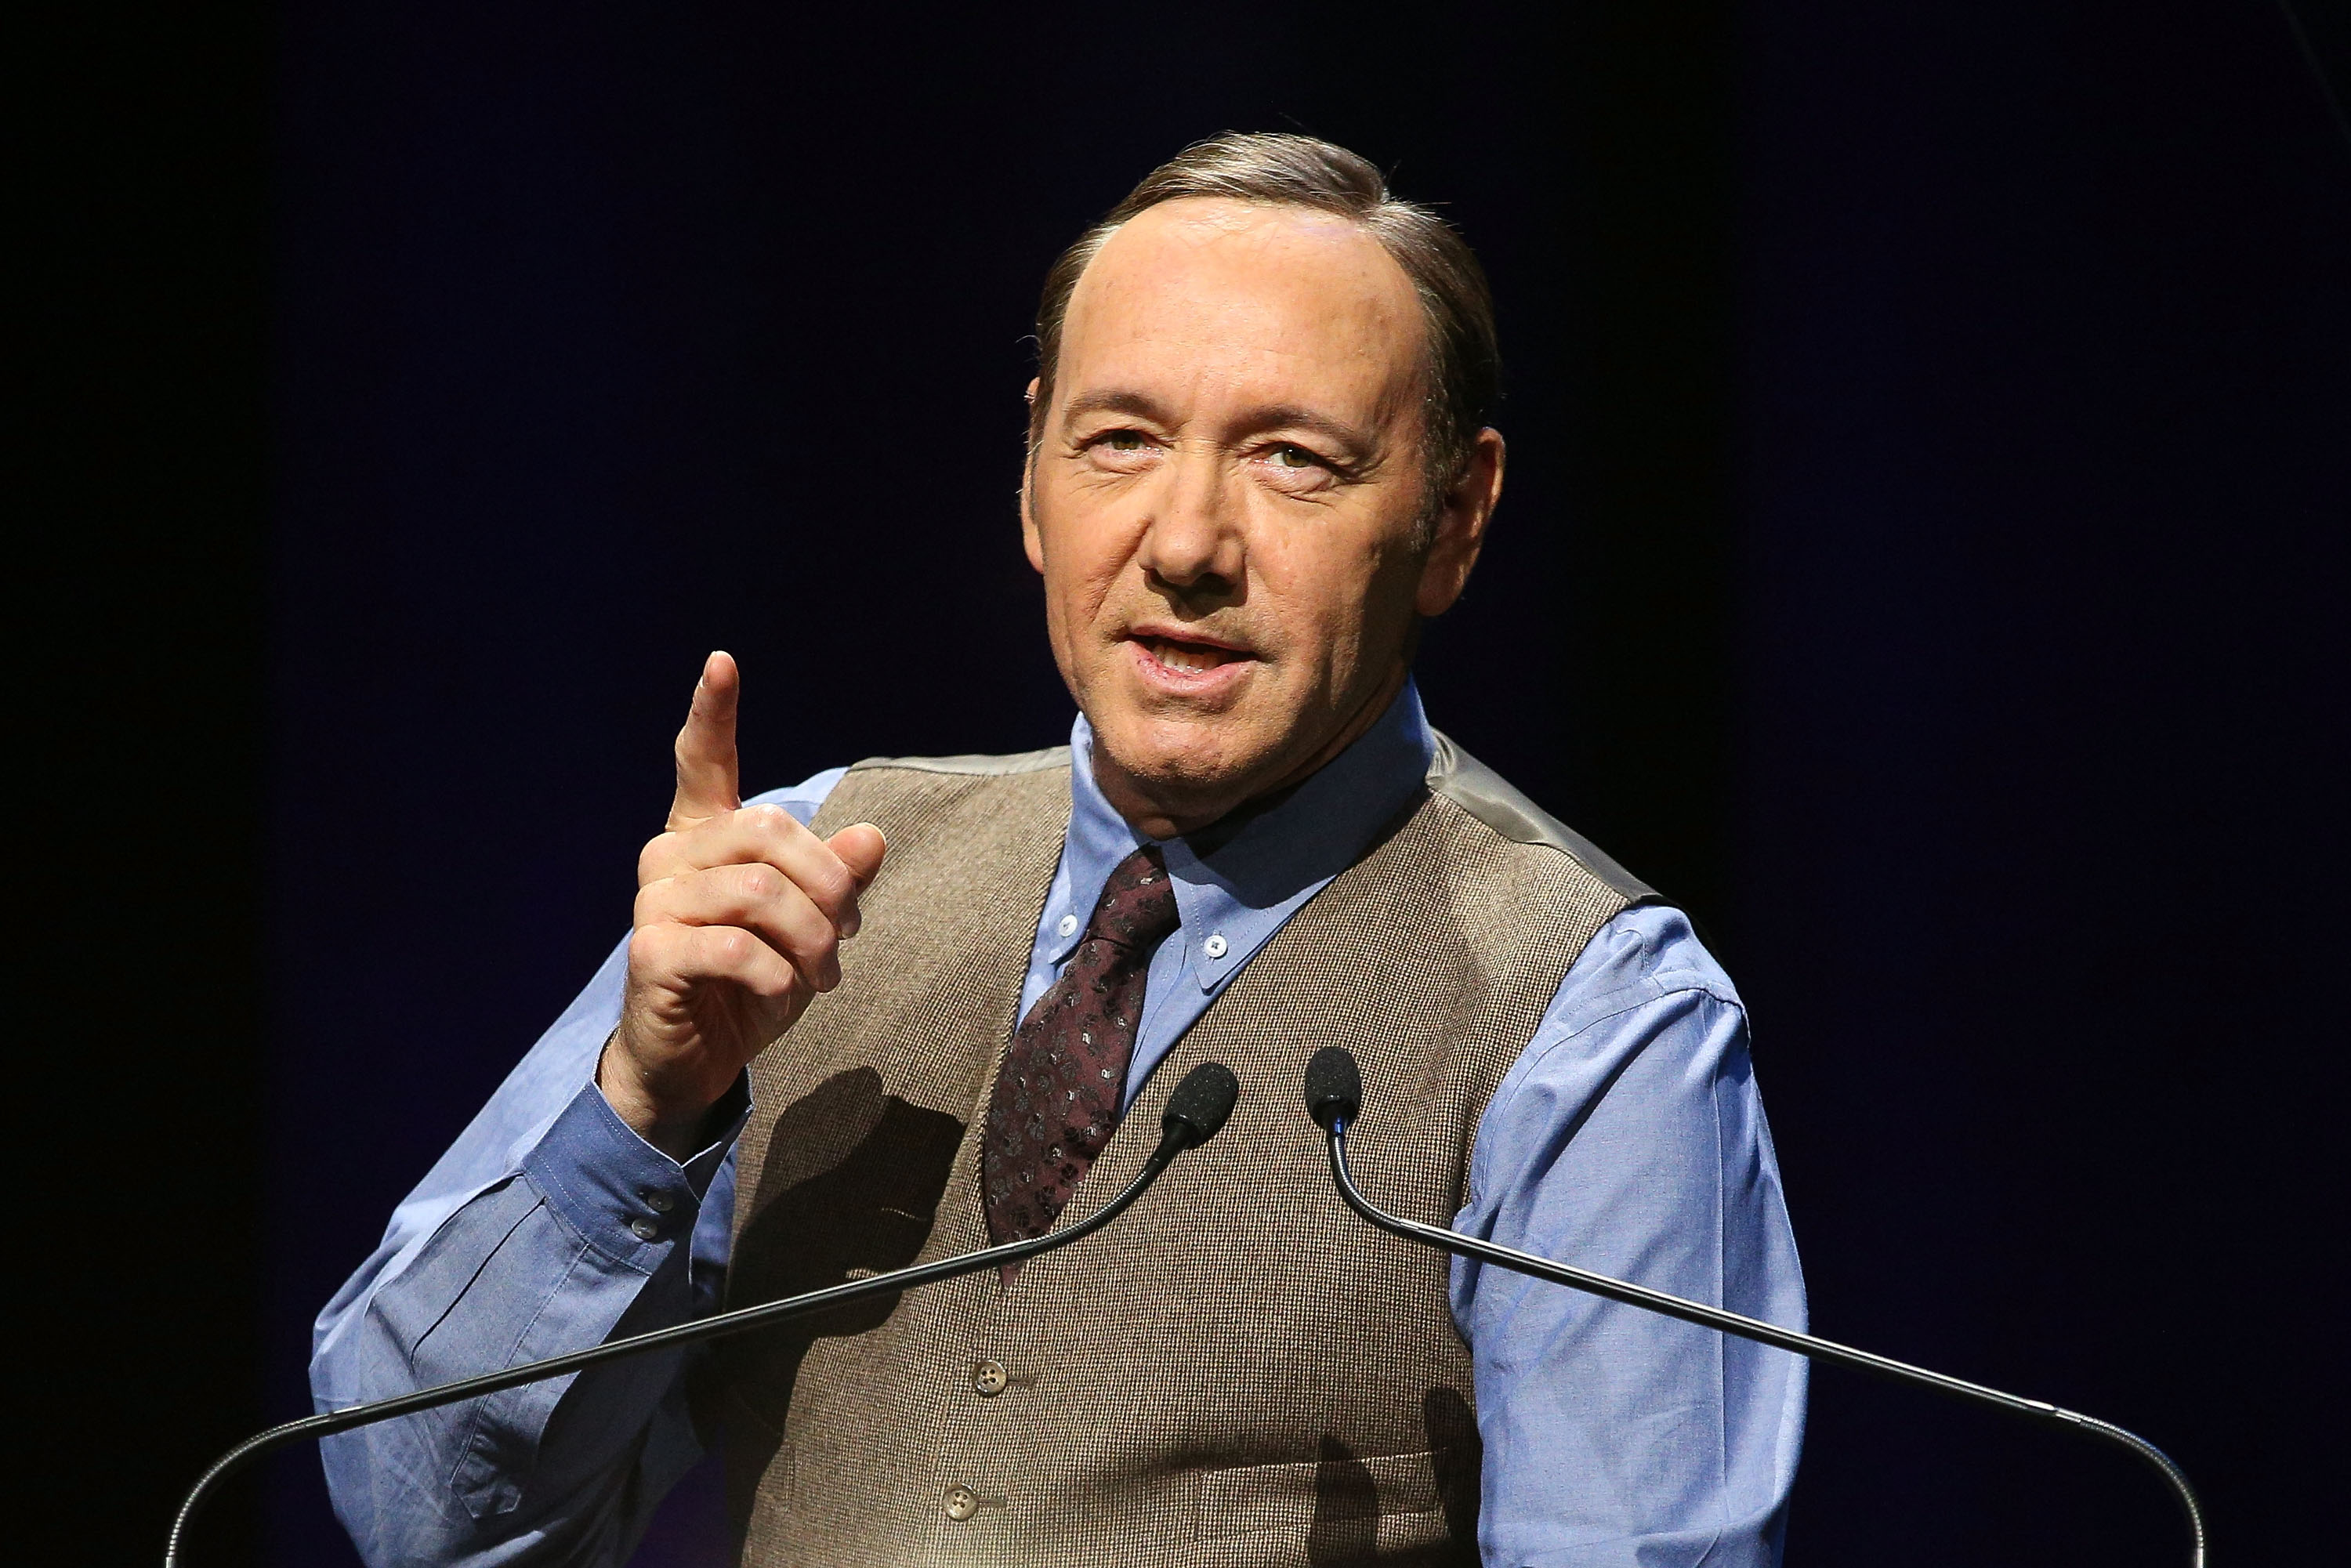 Kevin Spacey Compares “Struggles” To Those Of People Affected By Pandemic